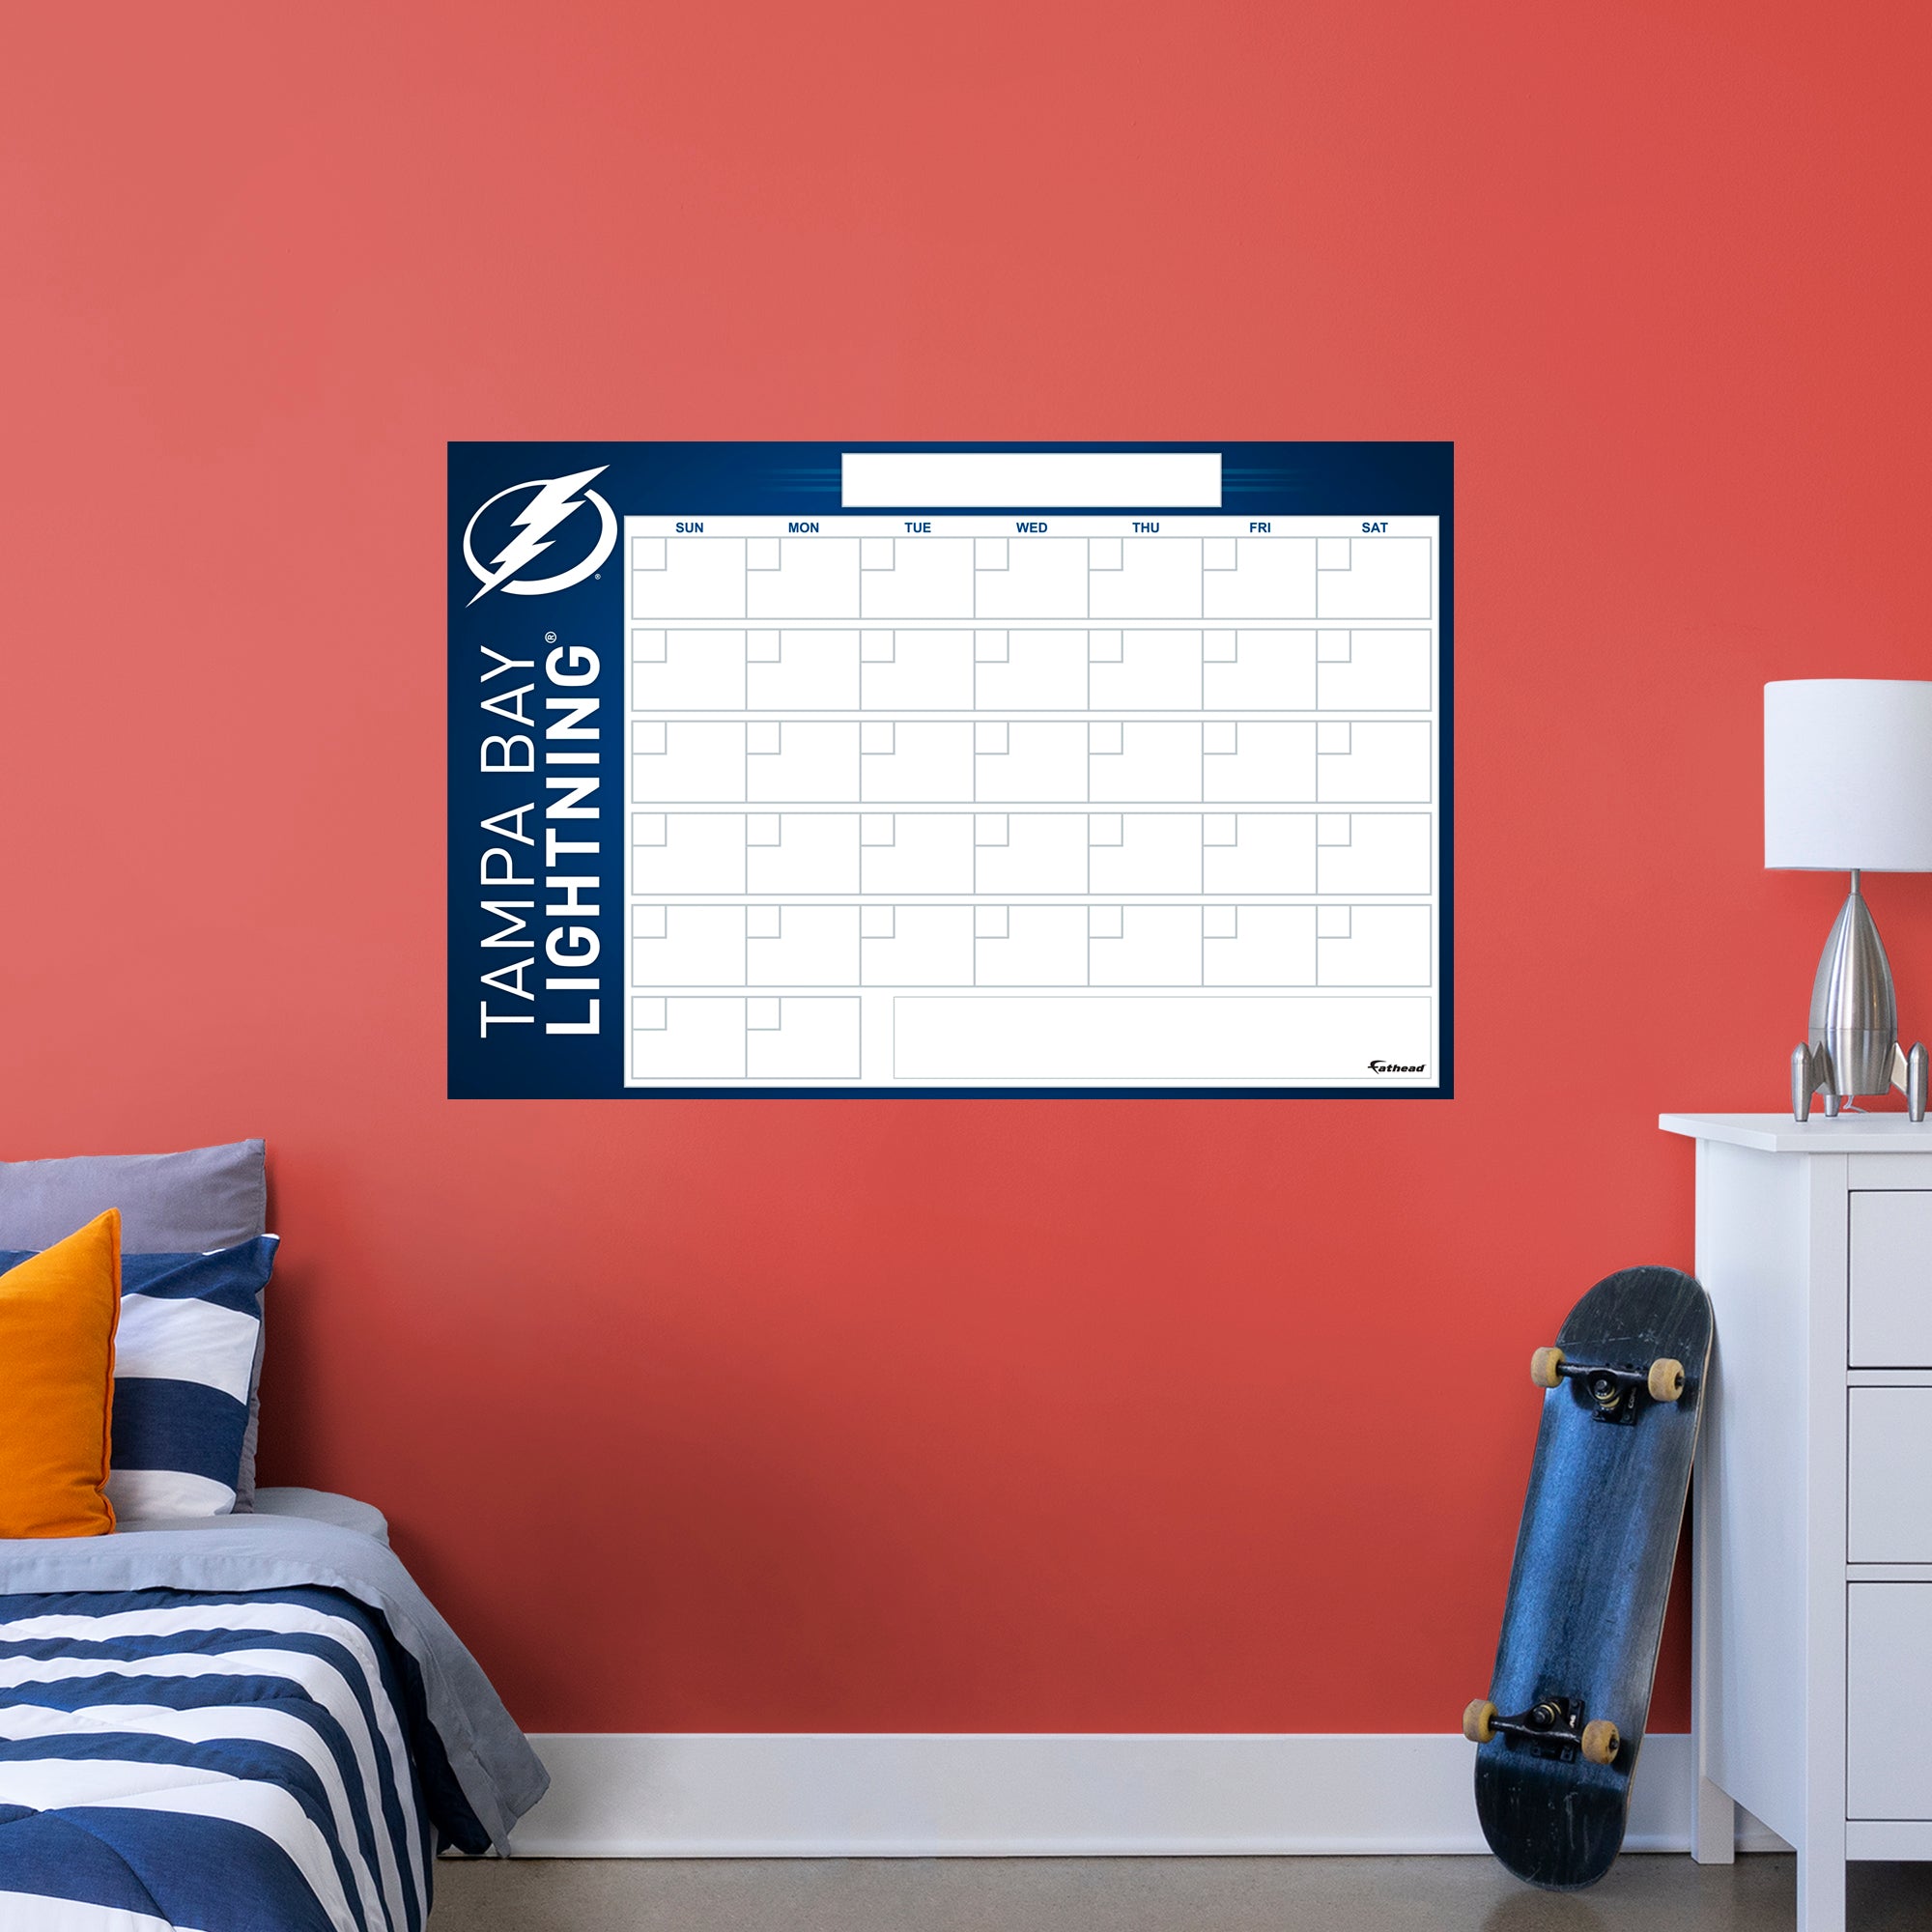 Tampa Bay Lightning Dry Erase Calendar - Officially Licensed NHL Removable Wall Decal Giant Decal (57"W x 34"H) by Fathead | Vin